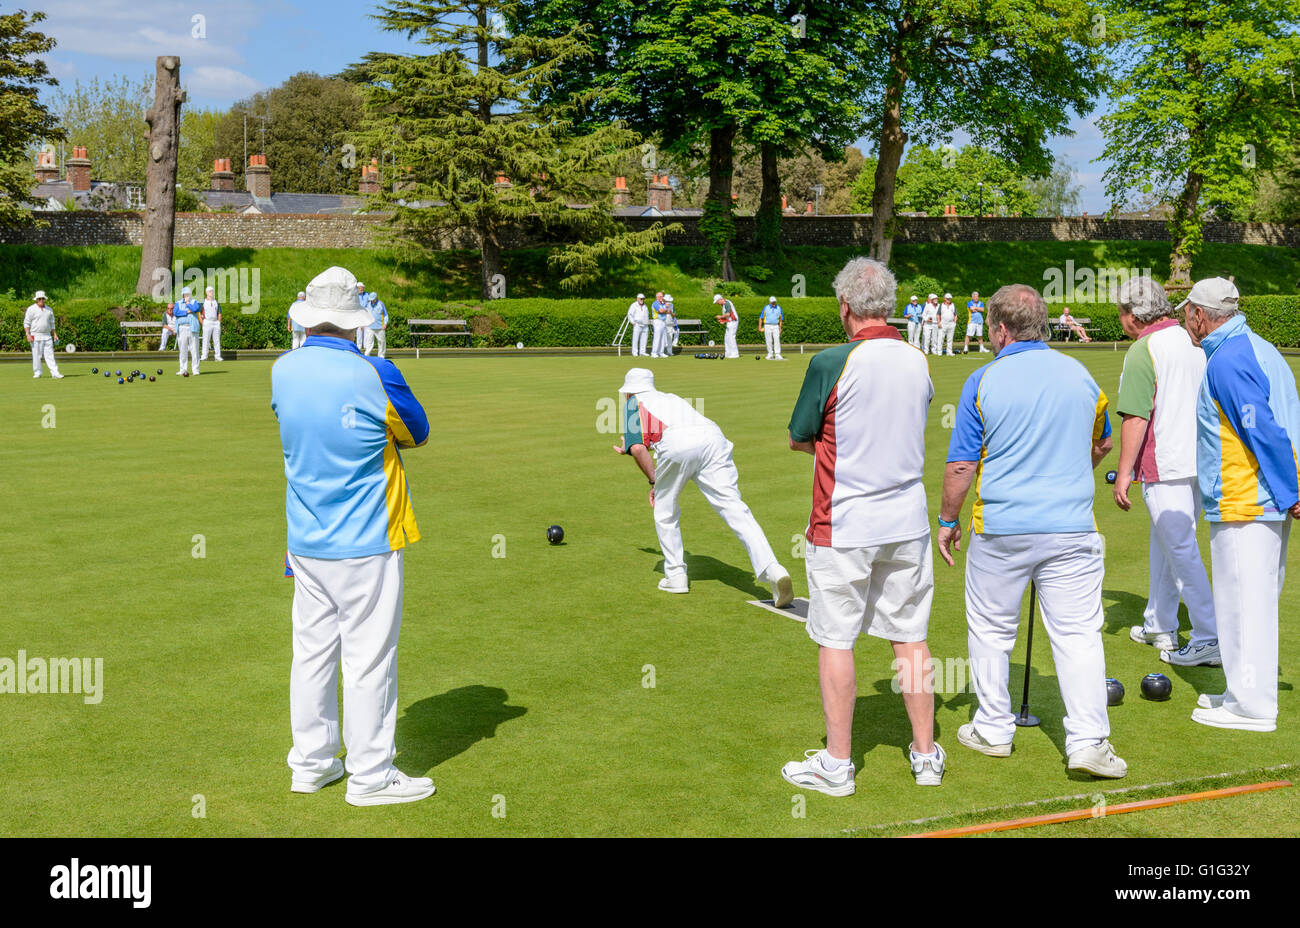 Playing bowls. Group of elderly people bowling on a bowling green in the UK. Stock Photo